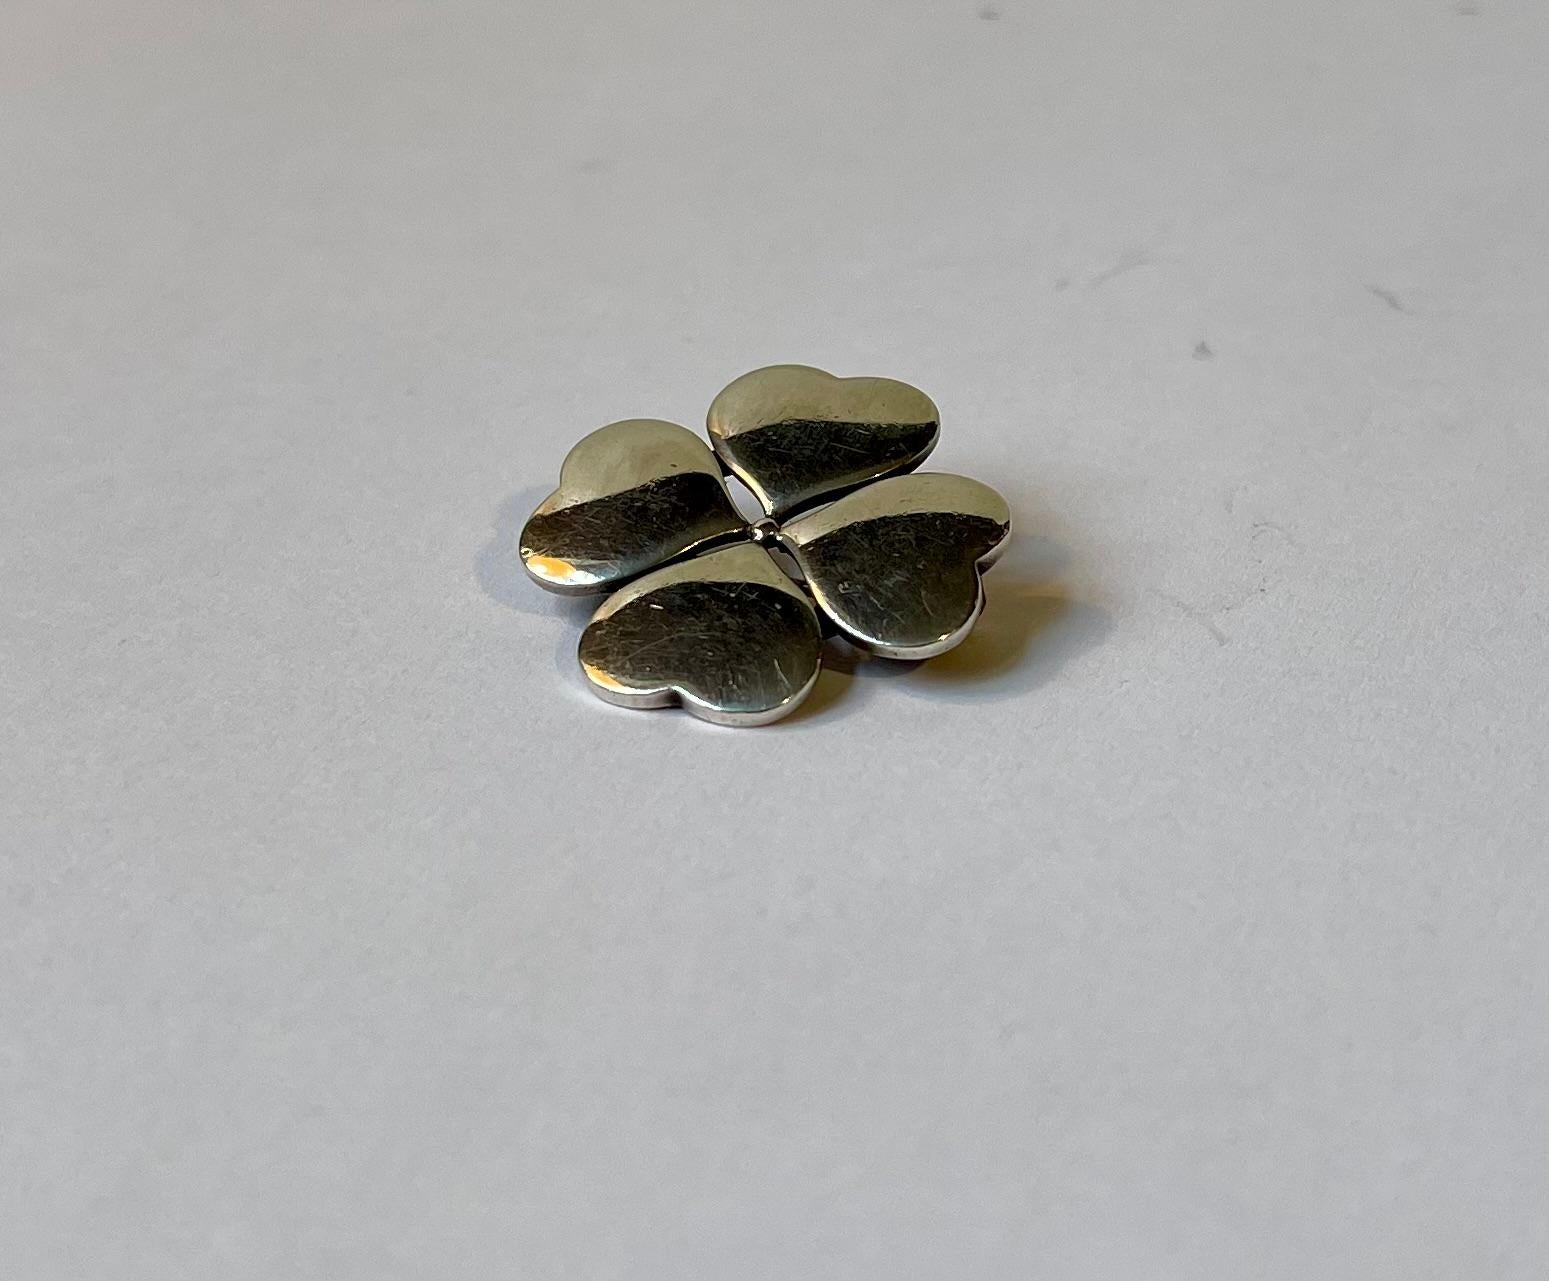 A stylish four clover pin brooch cleverly made from 4 connected hearts. Designed and made by Hans Hansen in Denmark ca 1960-70. Hallmarked: HH, 108, Denmark, 925s. Measurements: 27x27 mm. Weight approx. 10 grams.